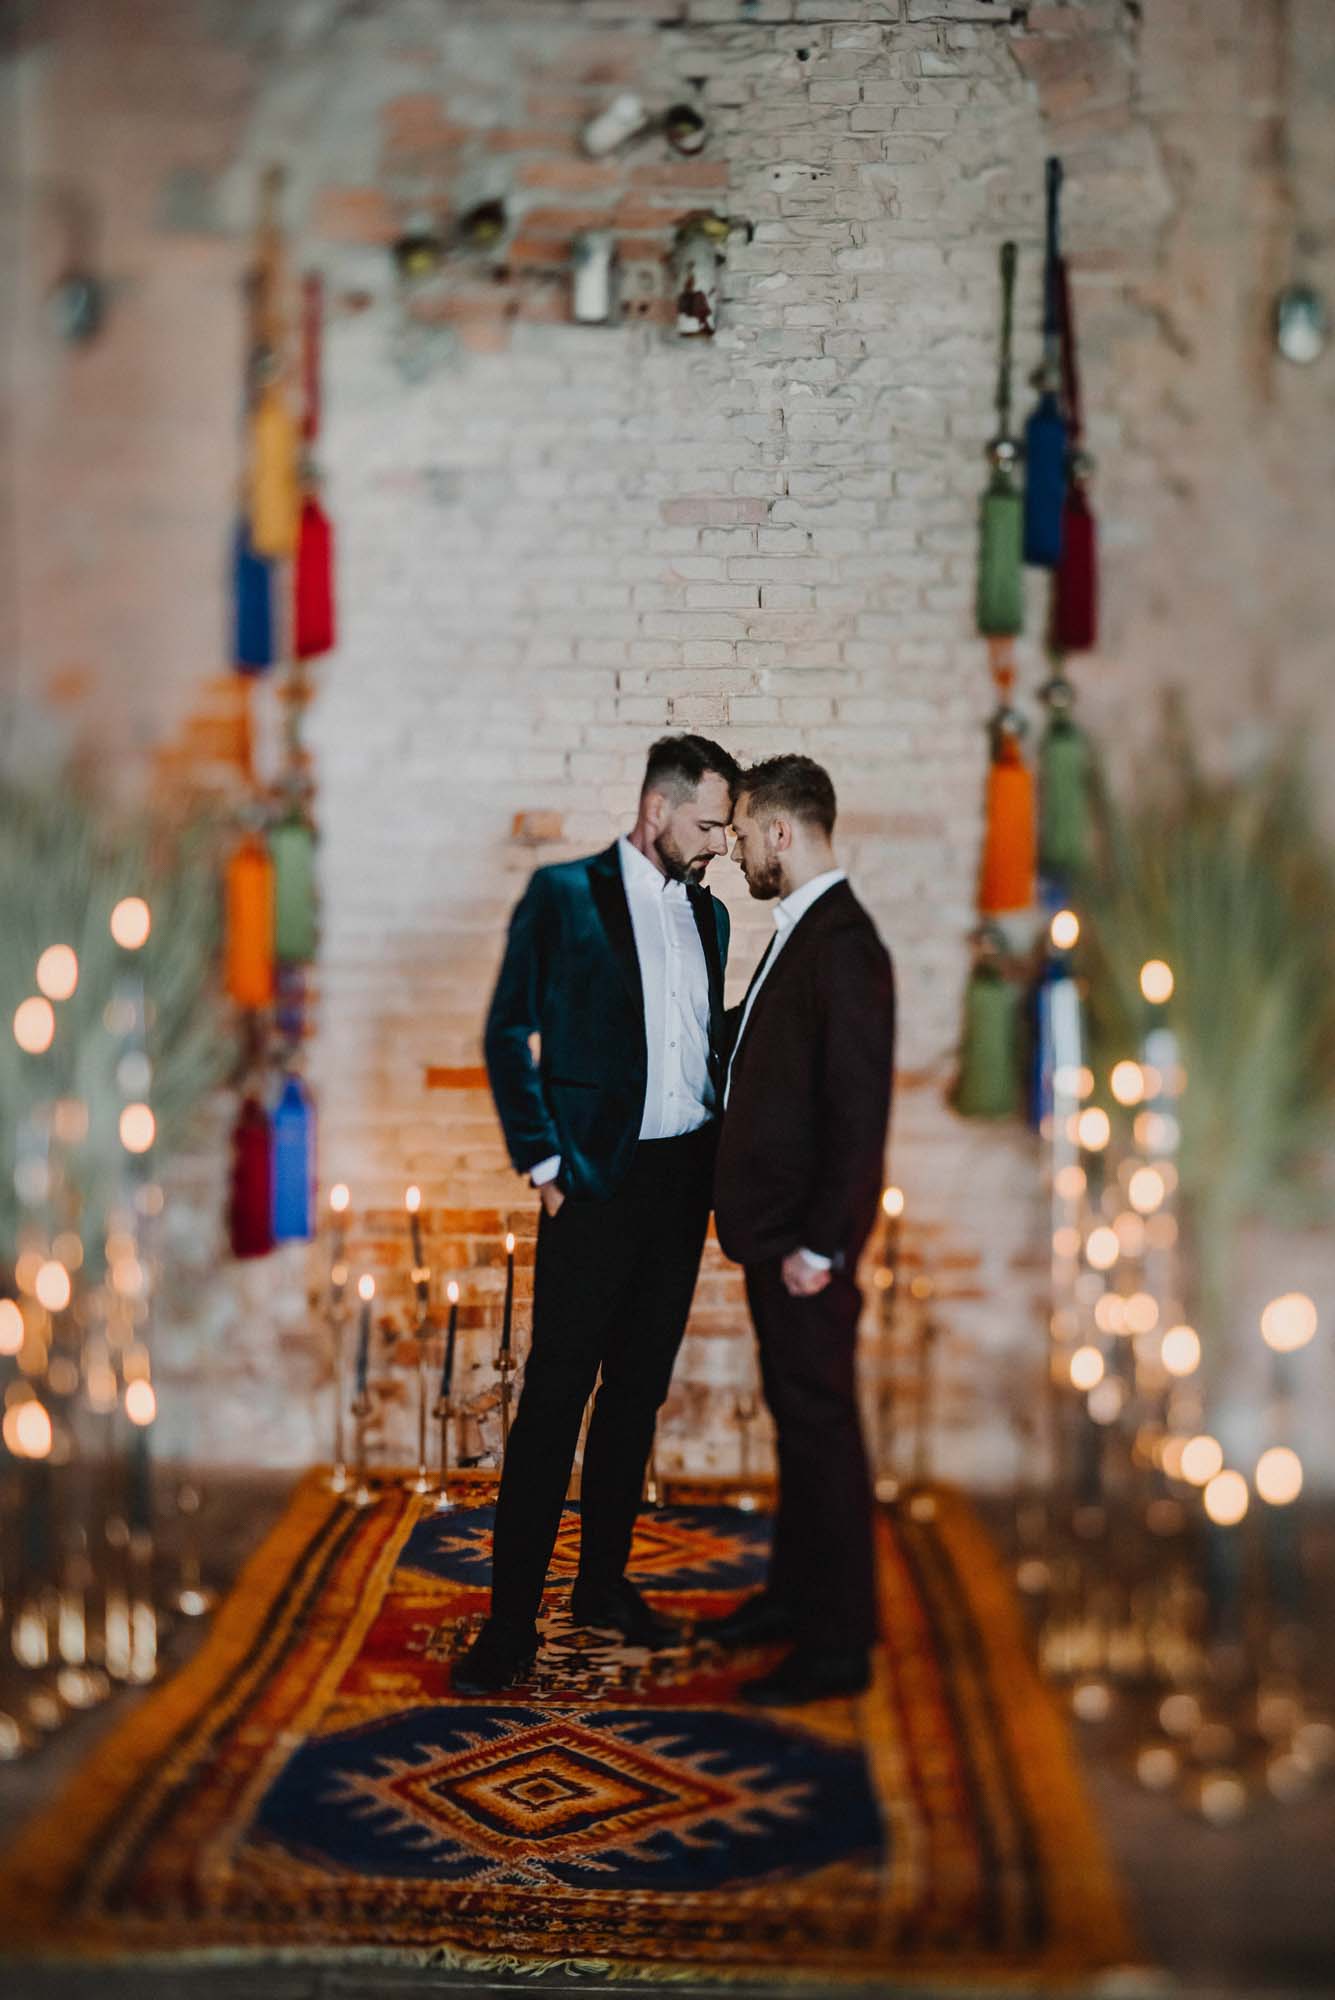 Moody and eclectic Polish wedding inspiration | Ajem Stories | Featured on Equally Wed, the leading LGBTQ+ wedding magazine